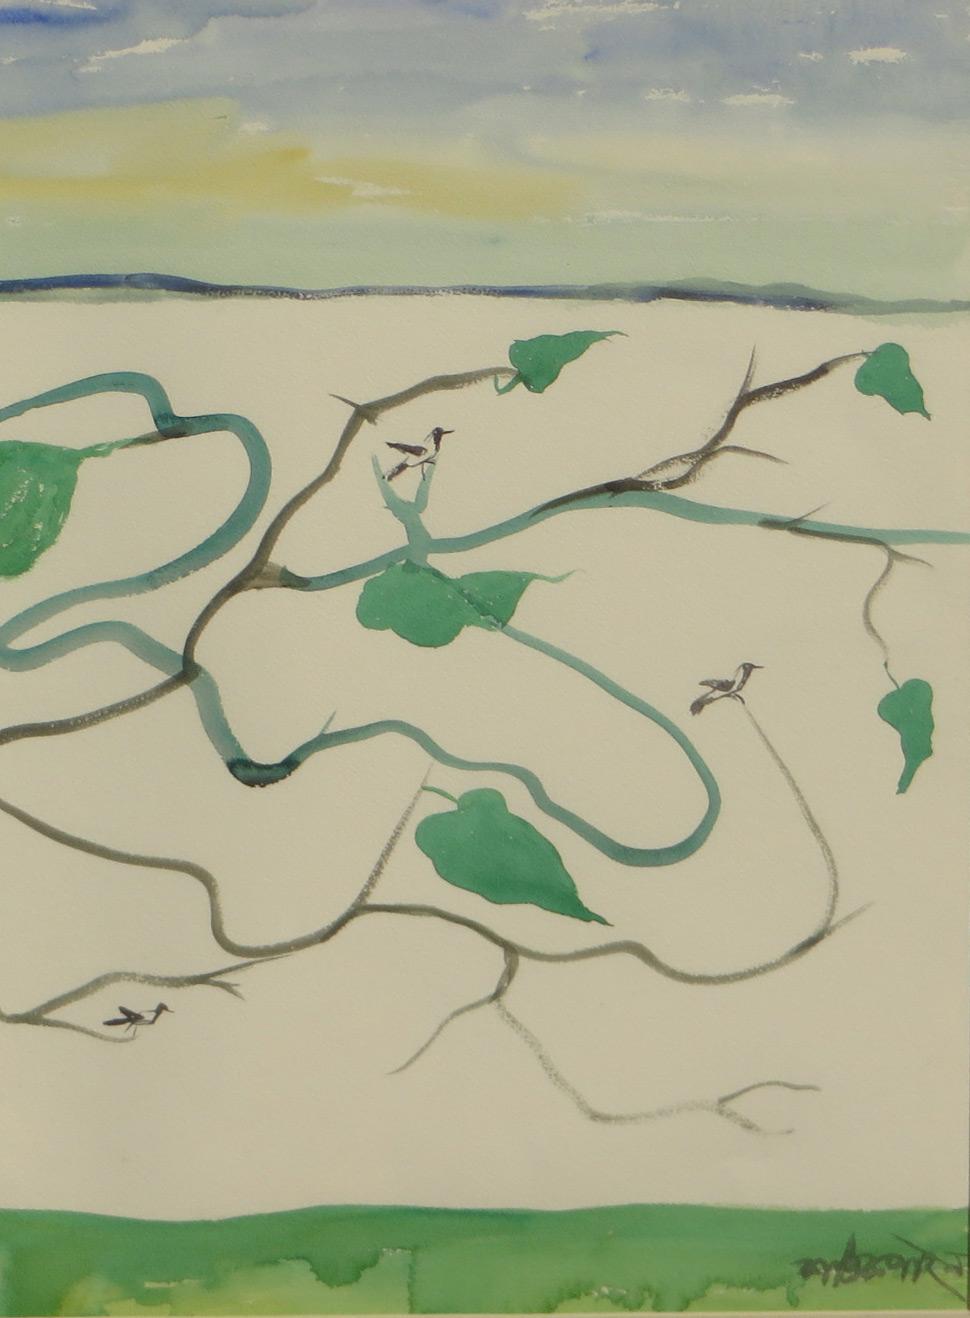 Landscape, Watercolor on paper, Green, Blue by Master Indian Artist 